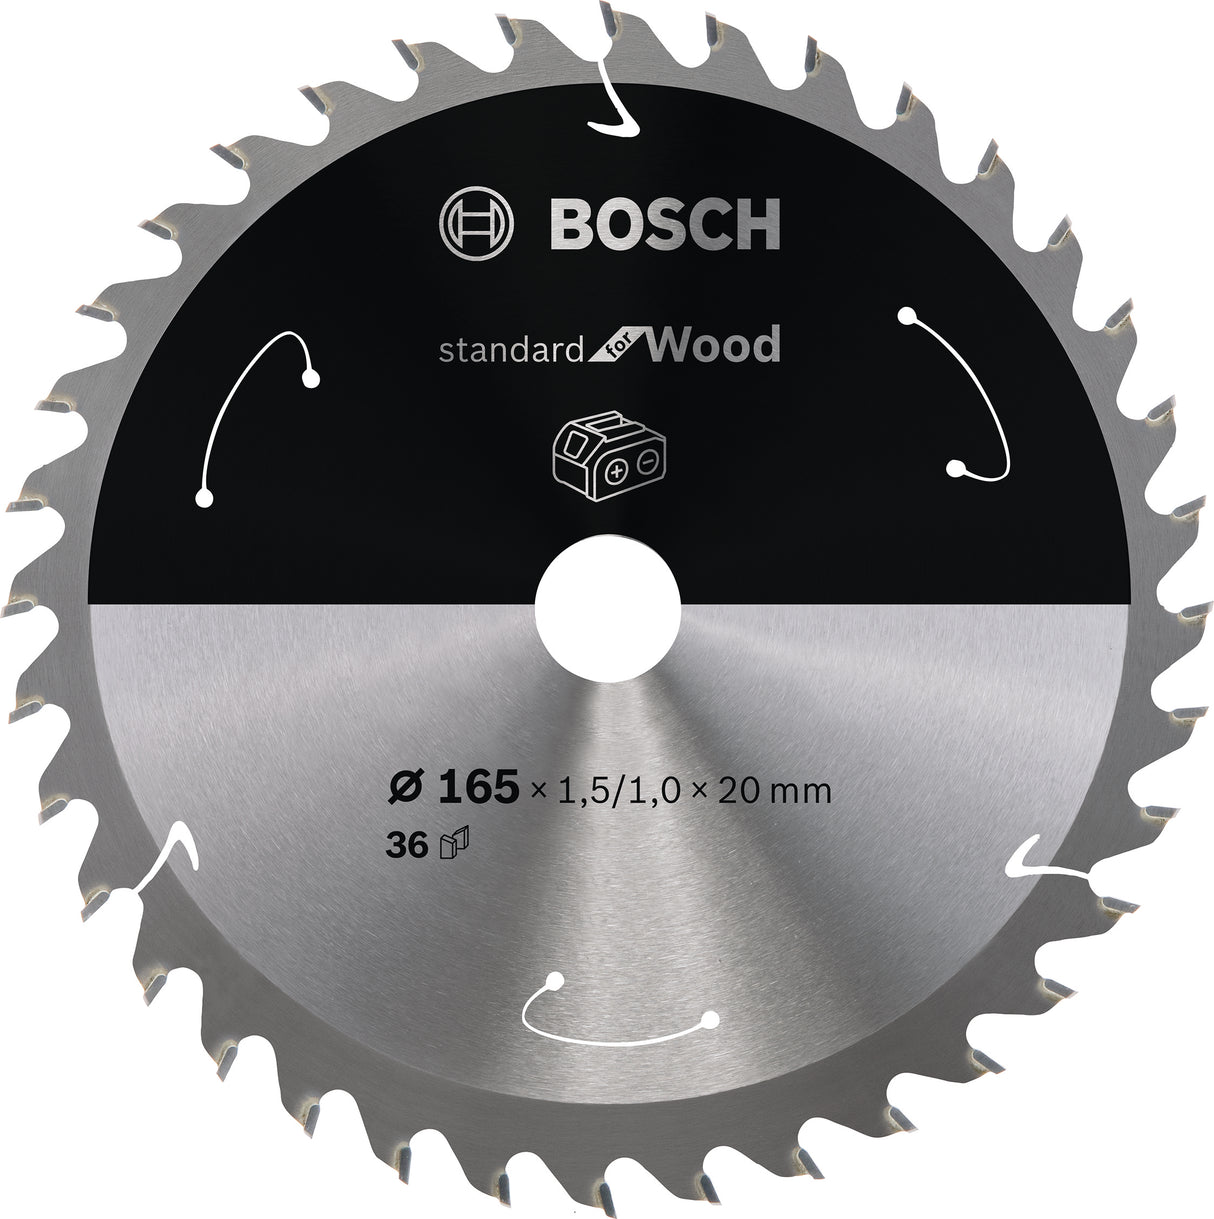 Bosch Professional Circular Saw Blade for Cordless Saws - Standard for Wood - 165x1.5/1x20 T36